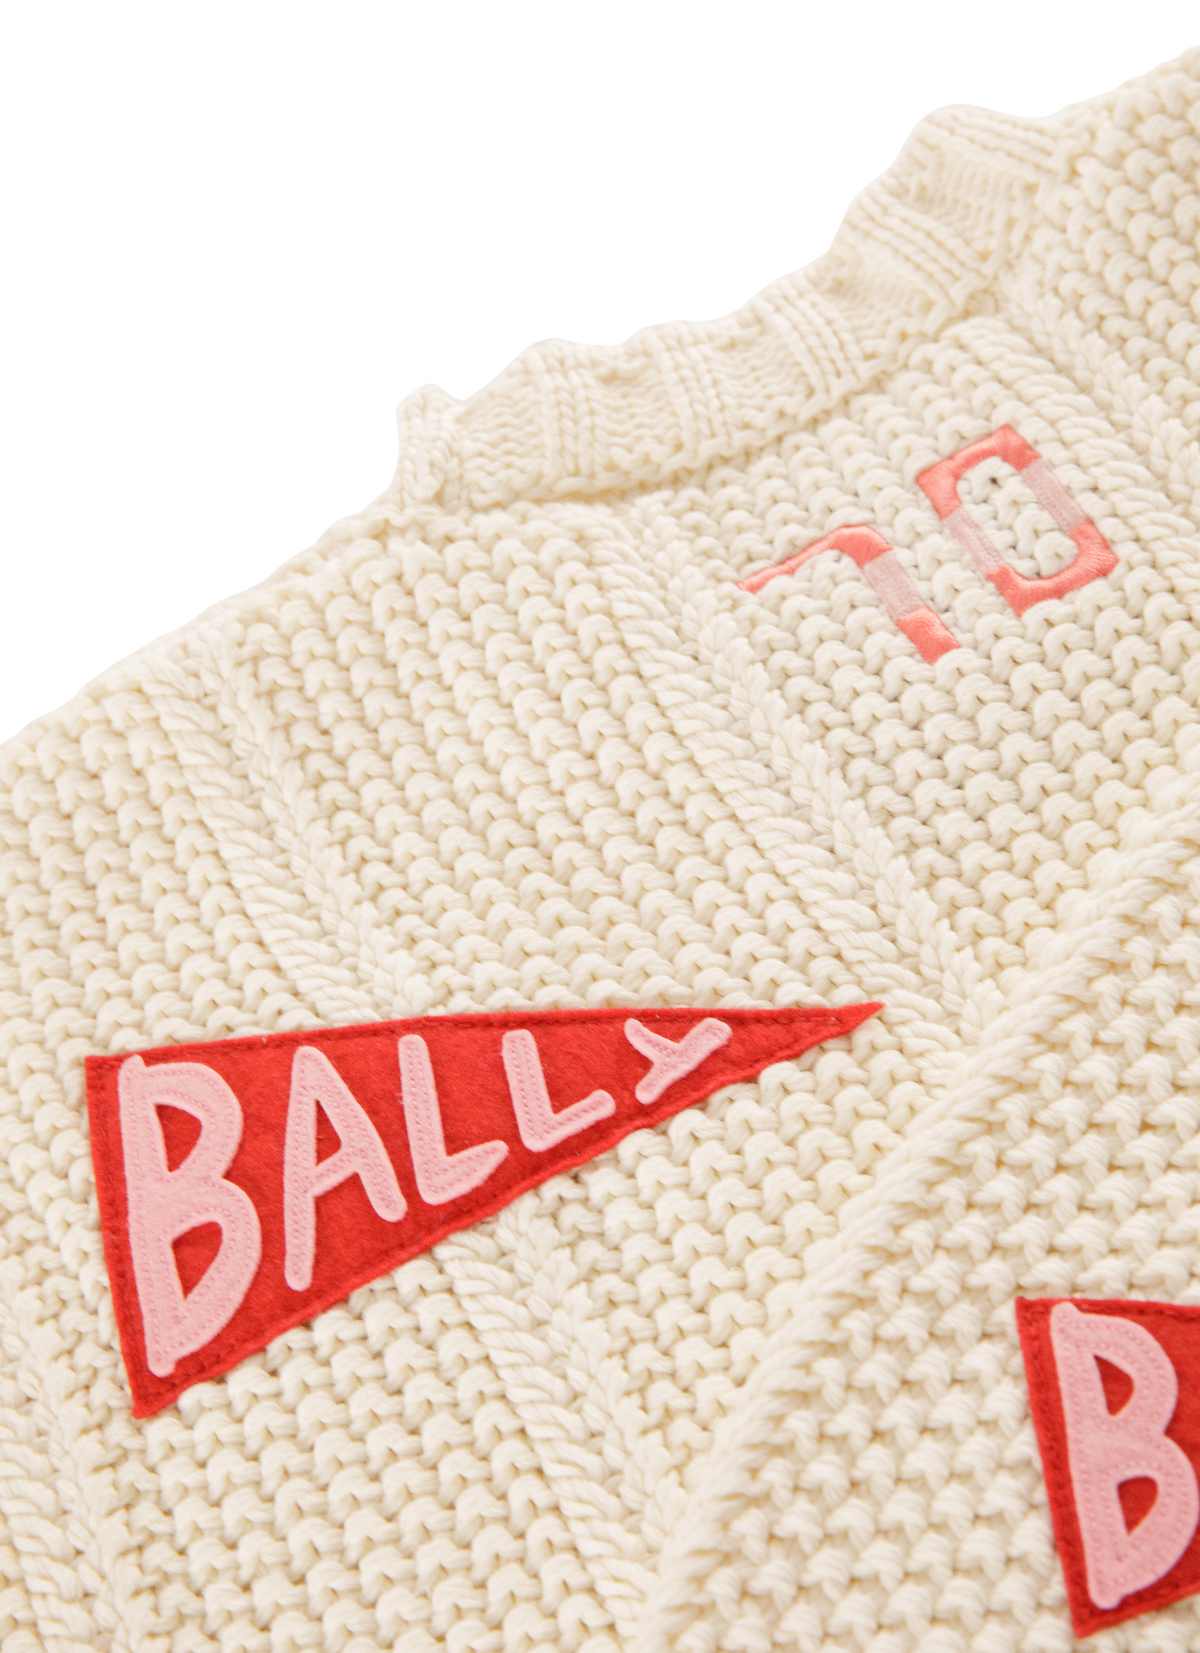 Bally Celebrates The 70-Year Anniversary Of Summiting Everest With A New Limited-Edition Capsule